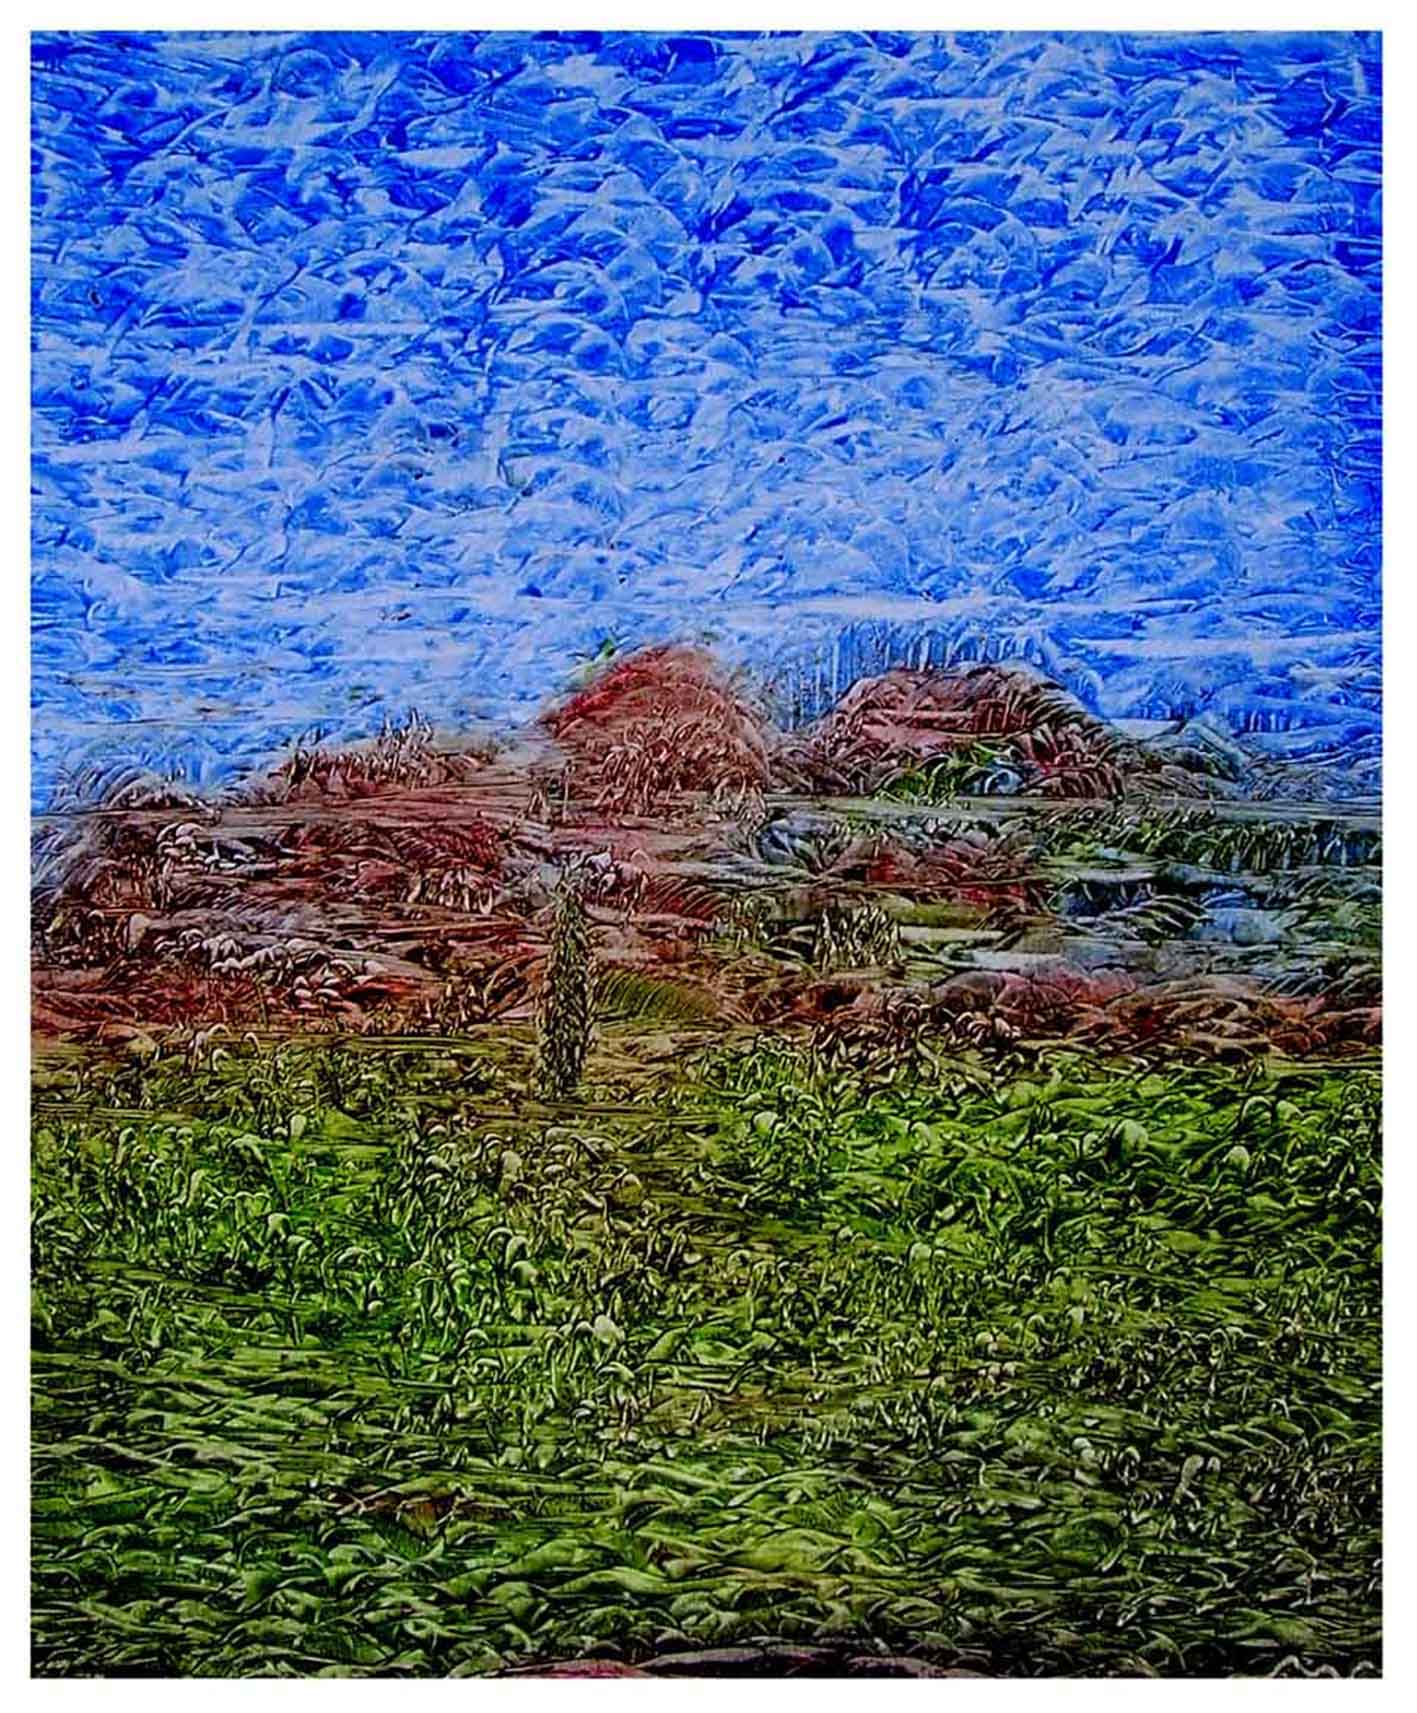 Multidimensional painting with a landscape in blue and green colors.